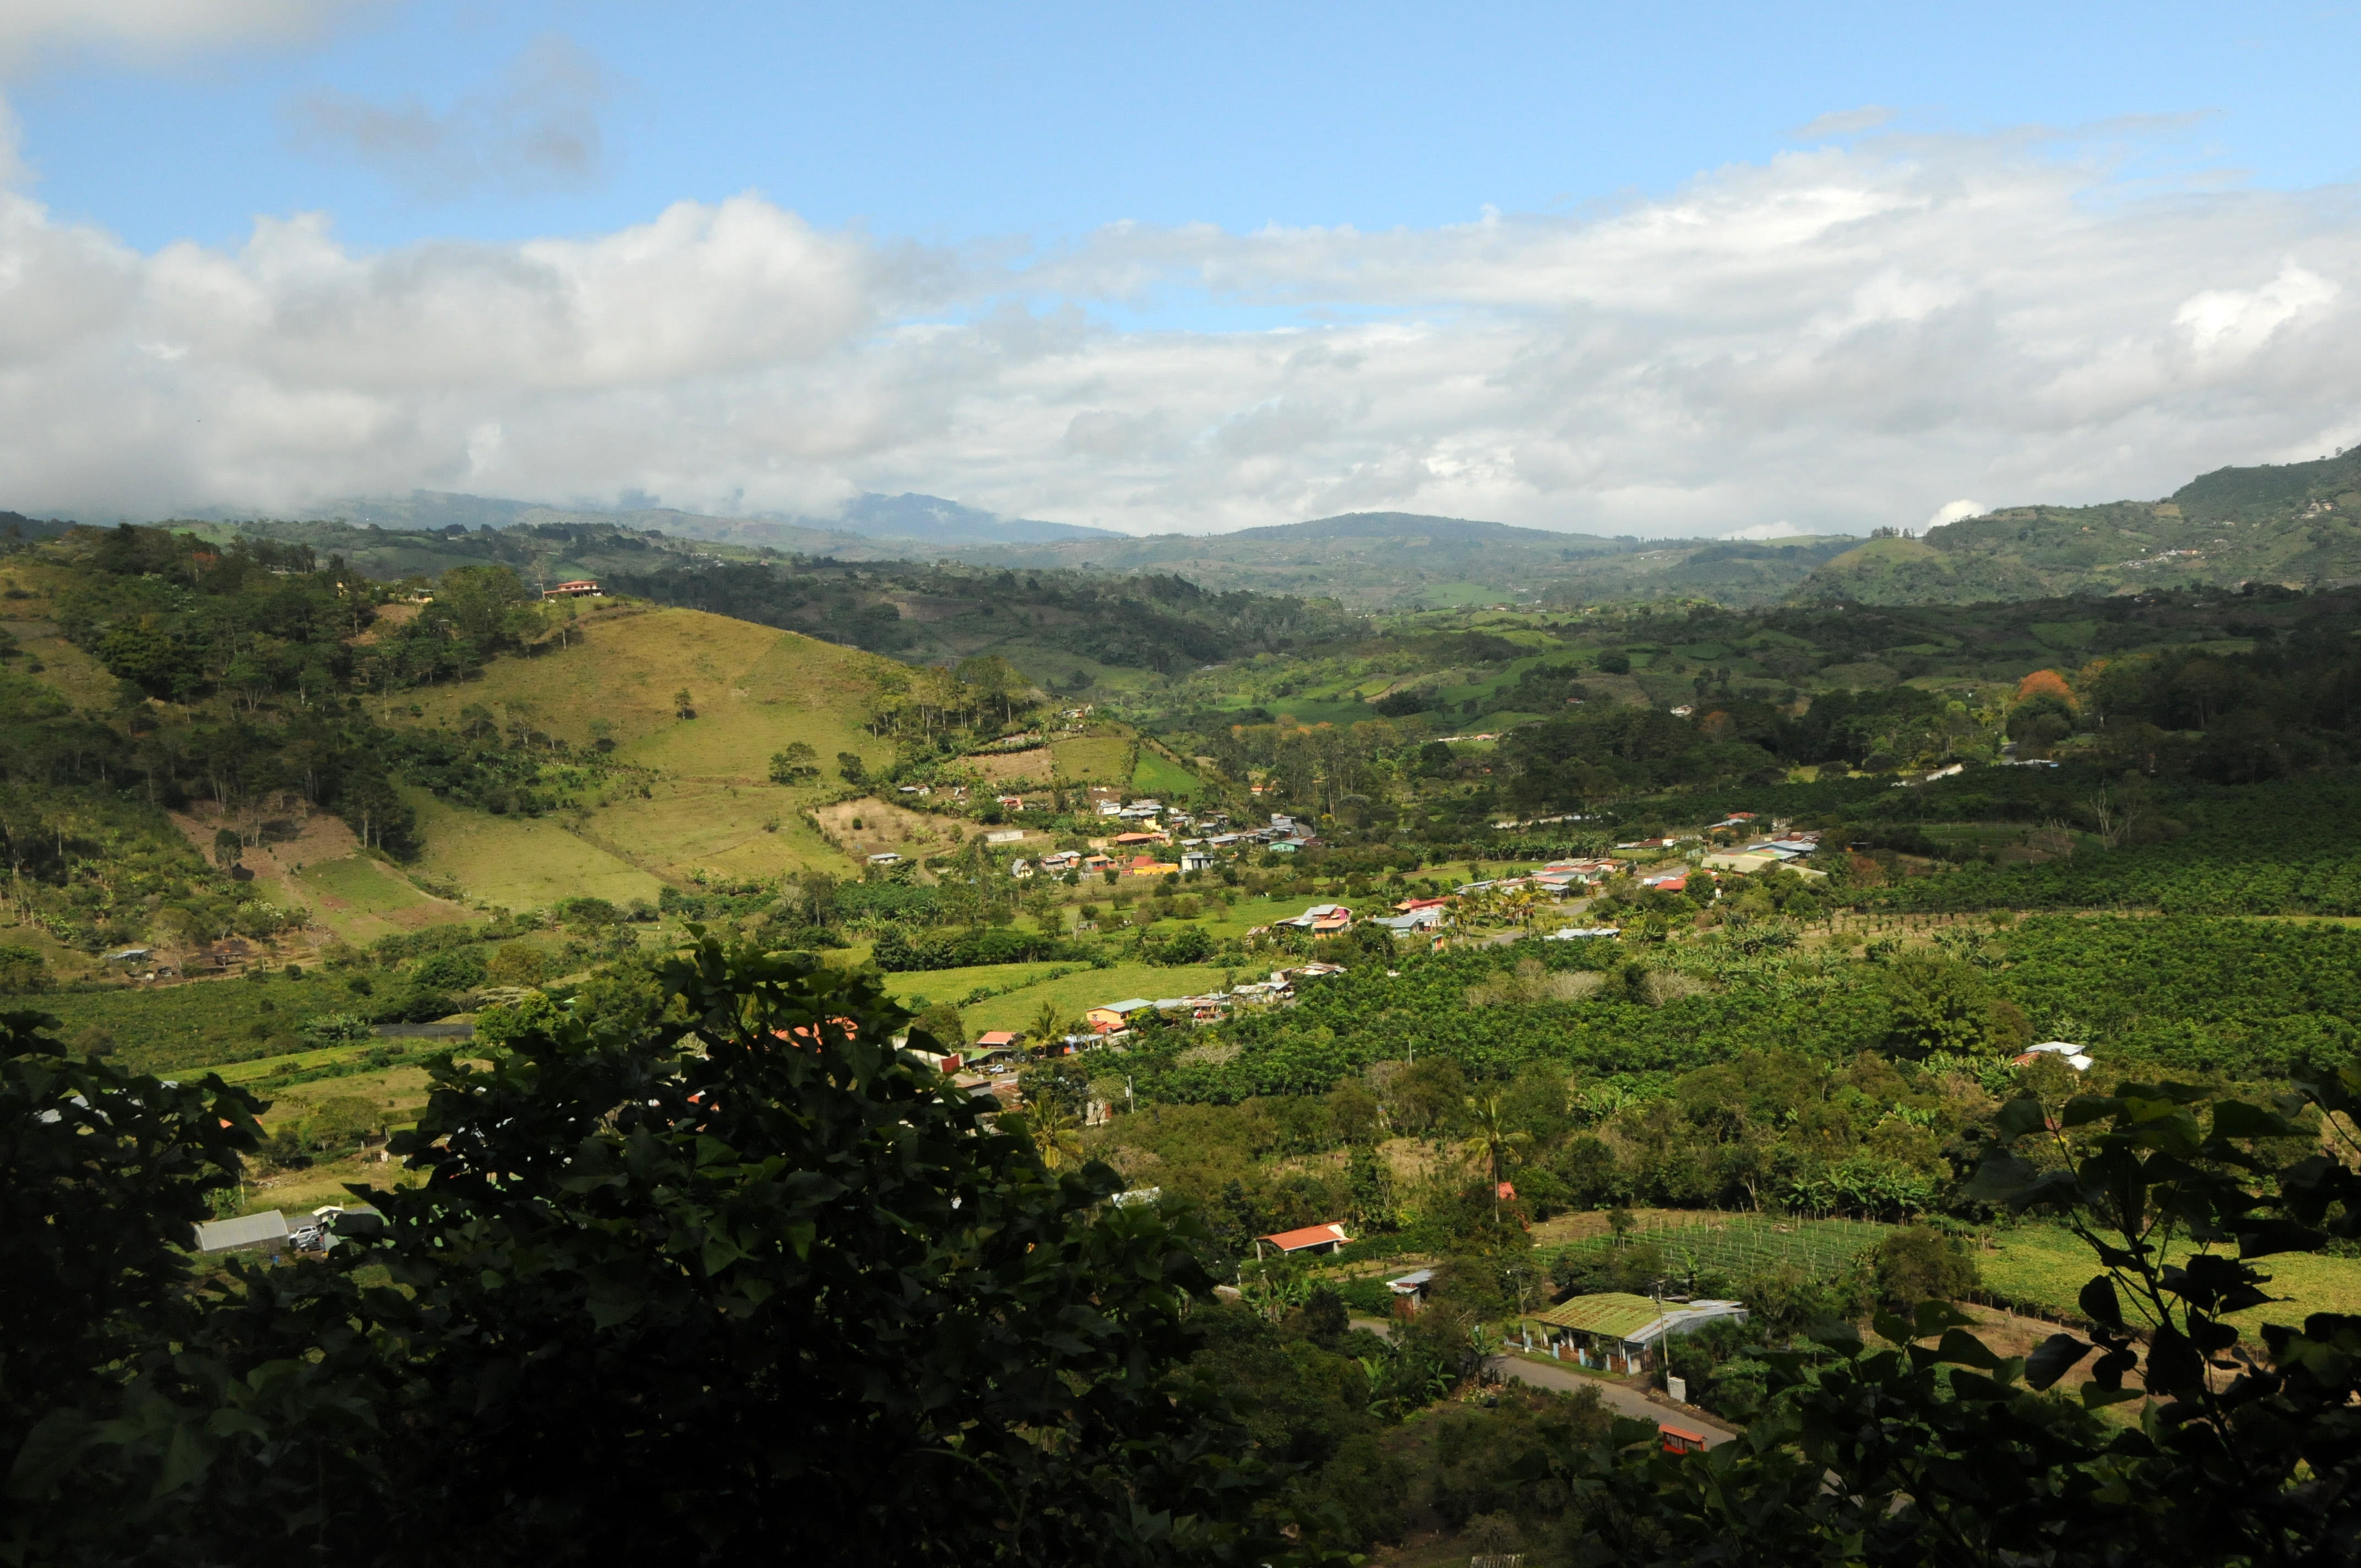 Road from Cartago to Orosi Valley